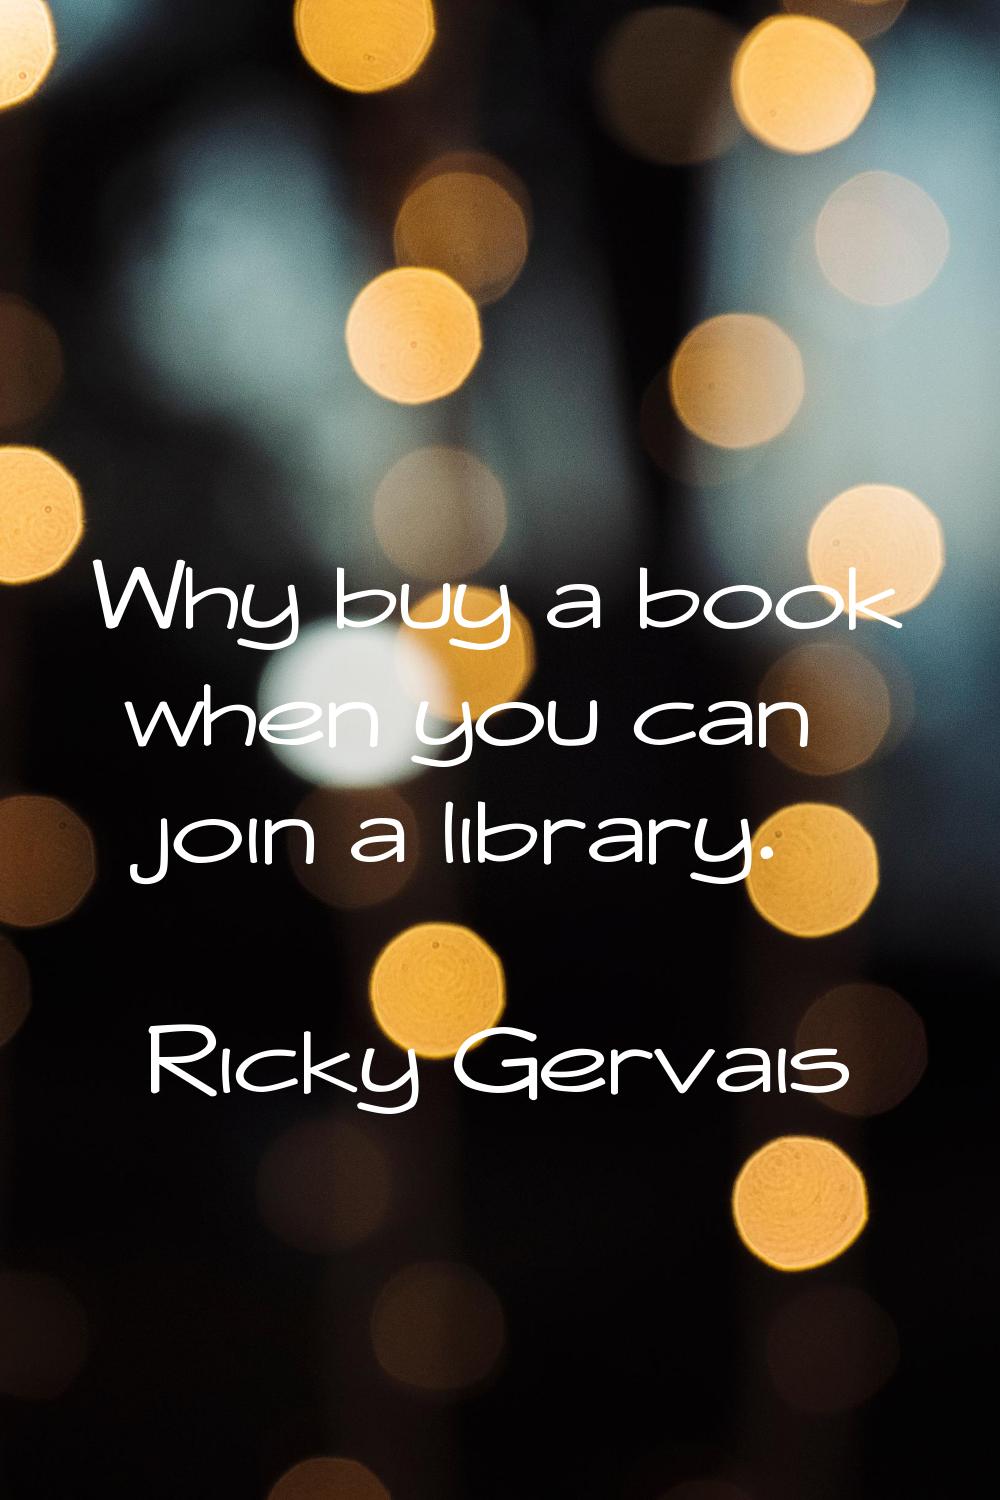 Why buy a book when you can join a library.